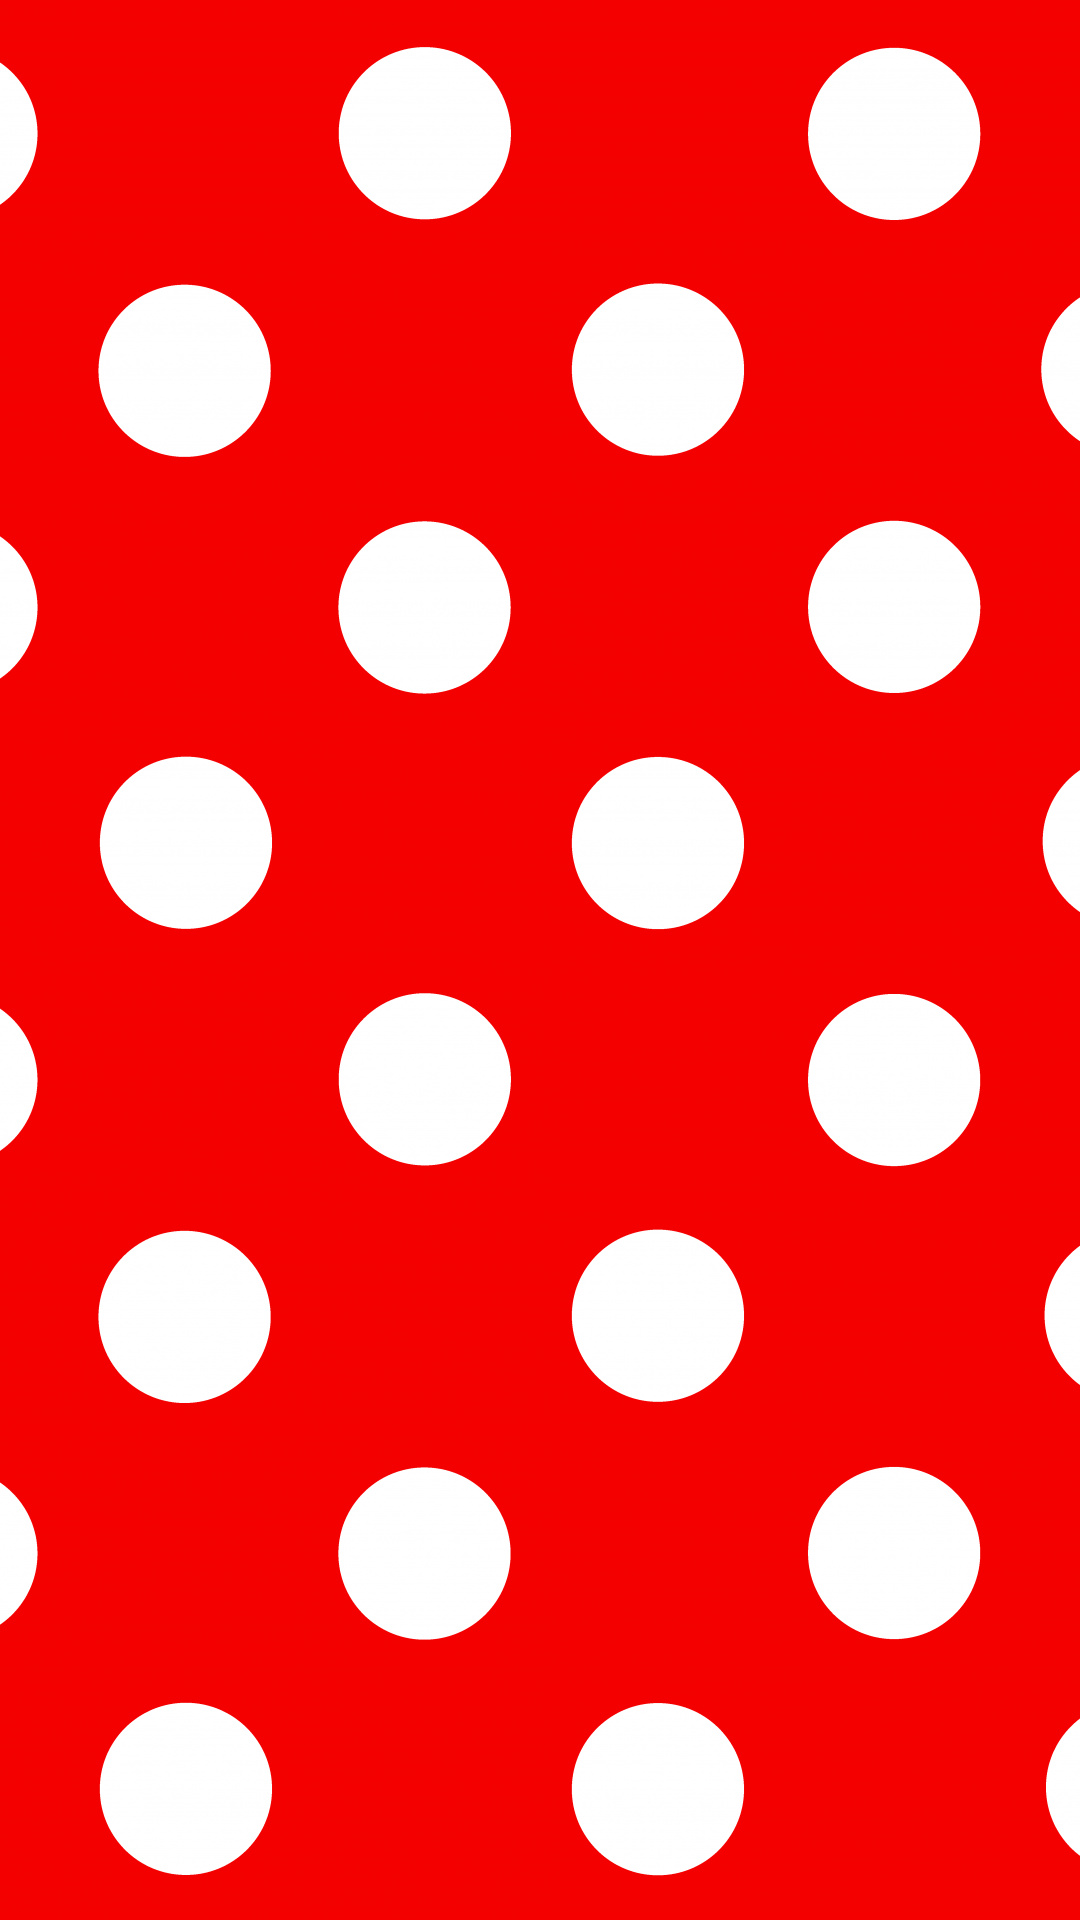 Polka Dot, Red and white theme, Classic and timeless, Elegant simplicity, 1080x1920 Full HD Handy